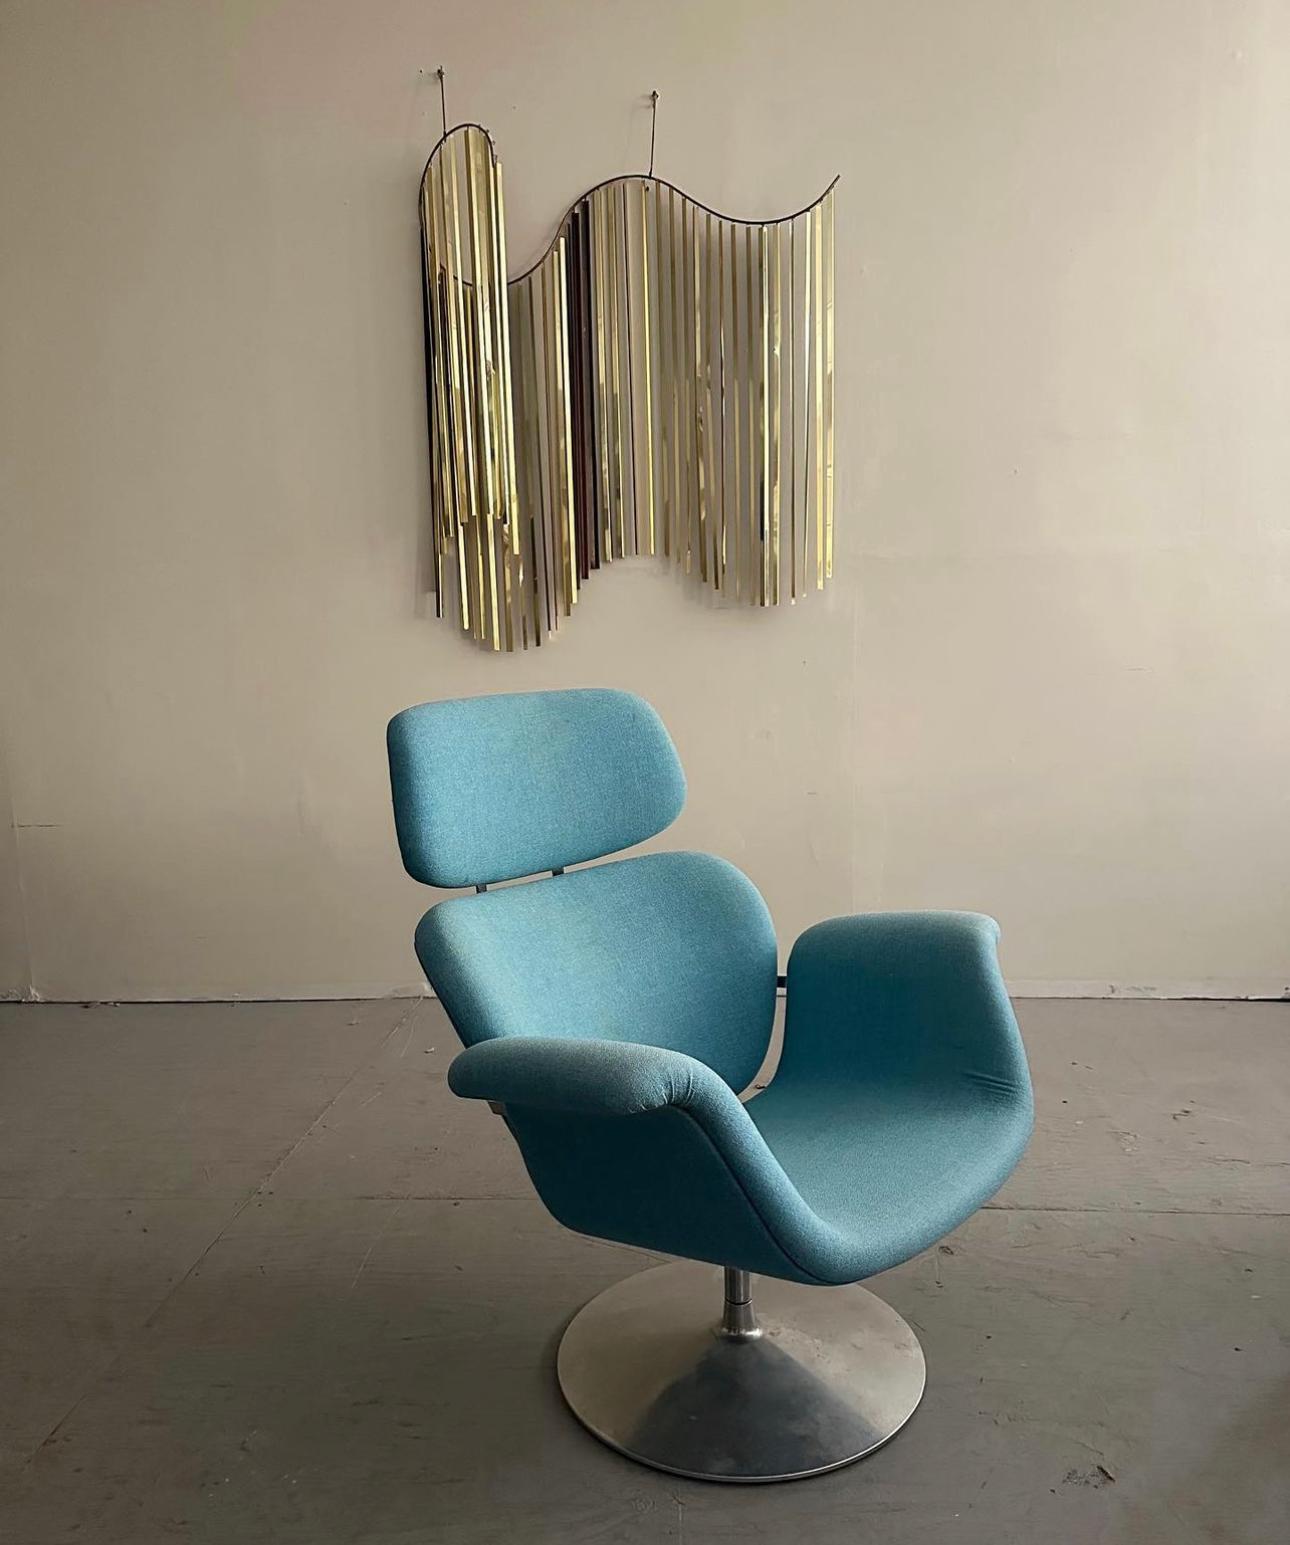 Mid-Century Modern “Big Tulip” Lounge Chair Designed By Pierre Paulin For Artifort. Originally designed by Pierre Paulin in 1965, this vintage “Big Tulip” lounge chair is made of molded and pressed wooden shells, and sits on a chromed steel base.